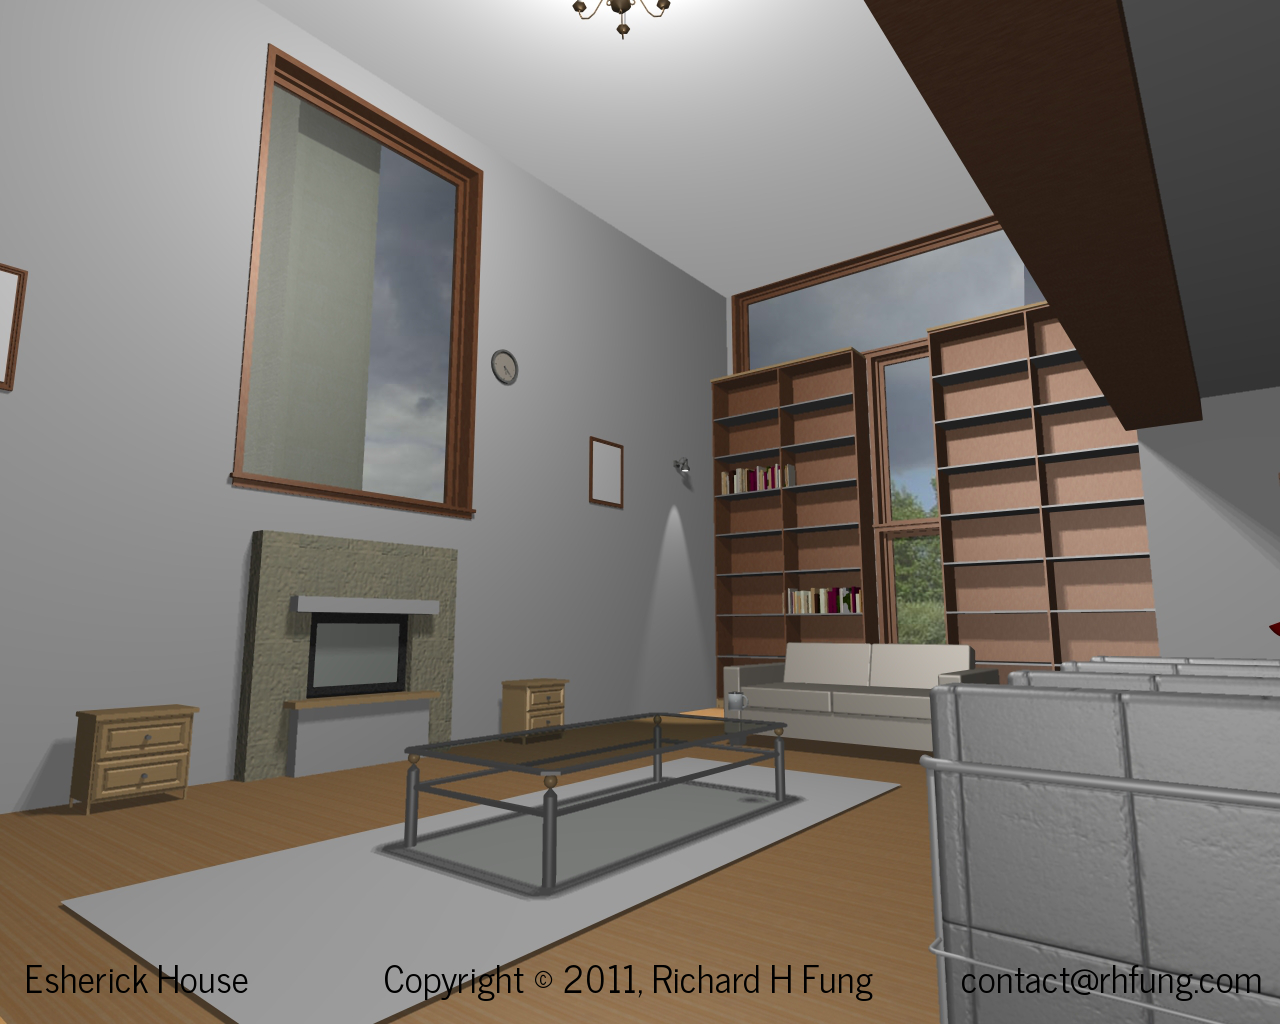 3D rendering of the Esherick House living room